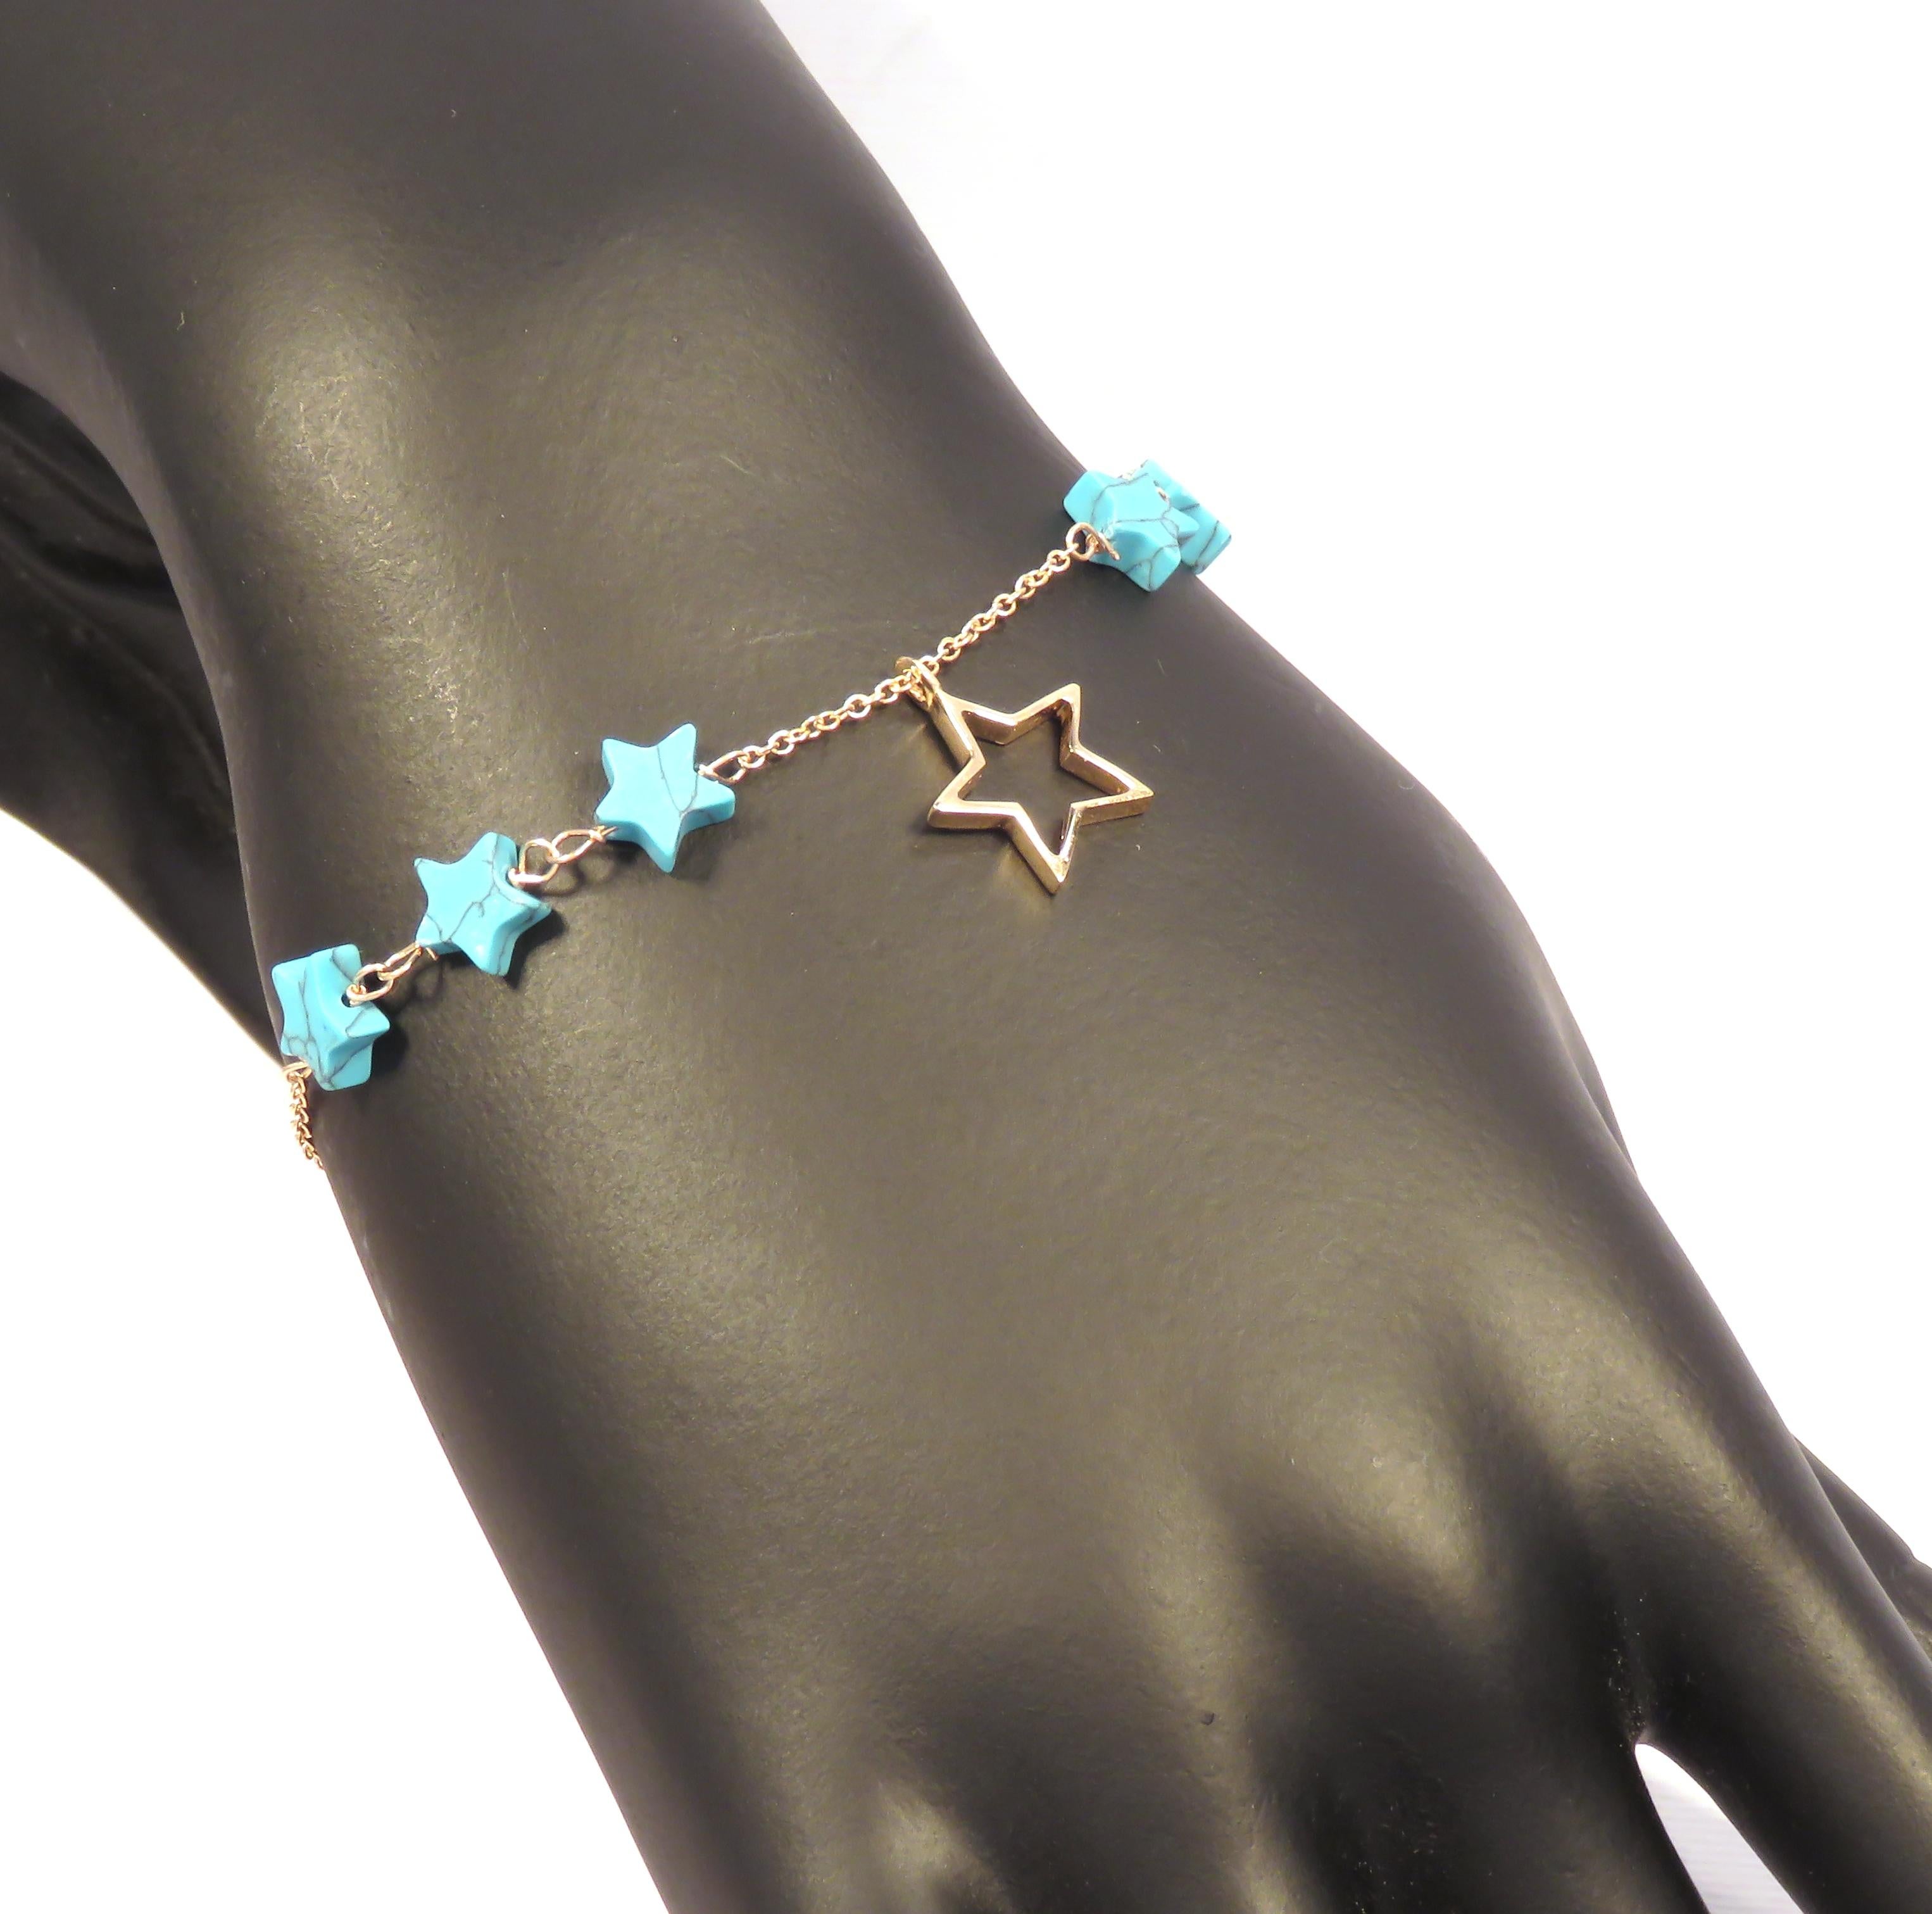 Attractive bracelet with natural blue star-cut turquoises hand-linked in 9 karat rose gold and 9 karat rose gold star charm. The bracelet length is adjustable from 170 mm to 190 mm / from 6.692 inches to 7.480 inches, it is possible to lengthen the